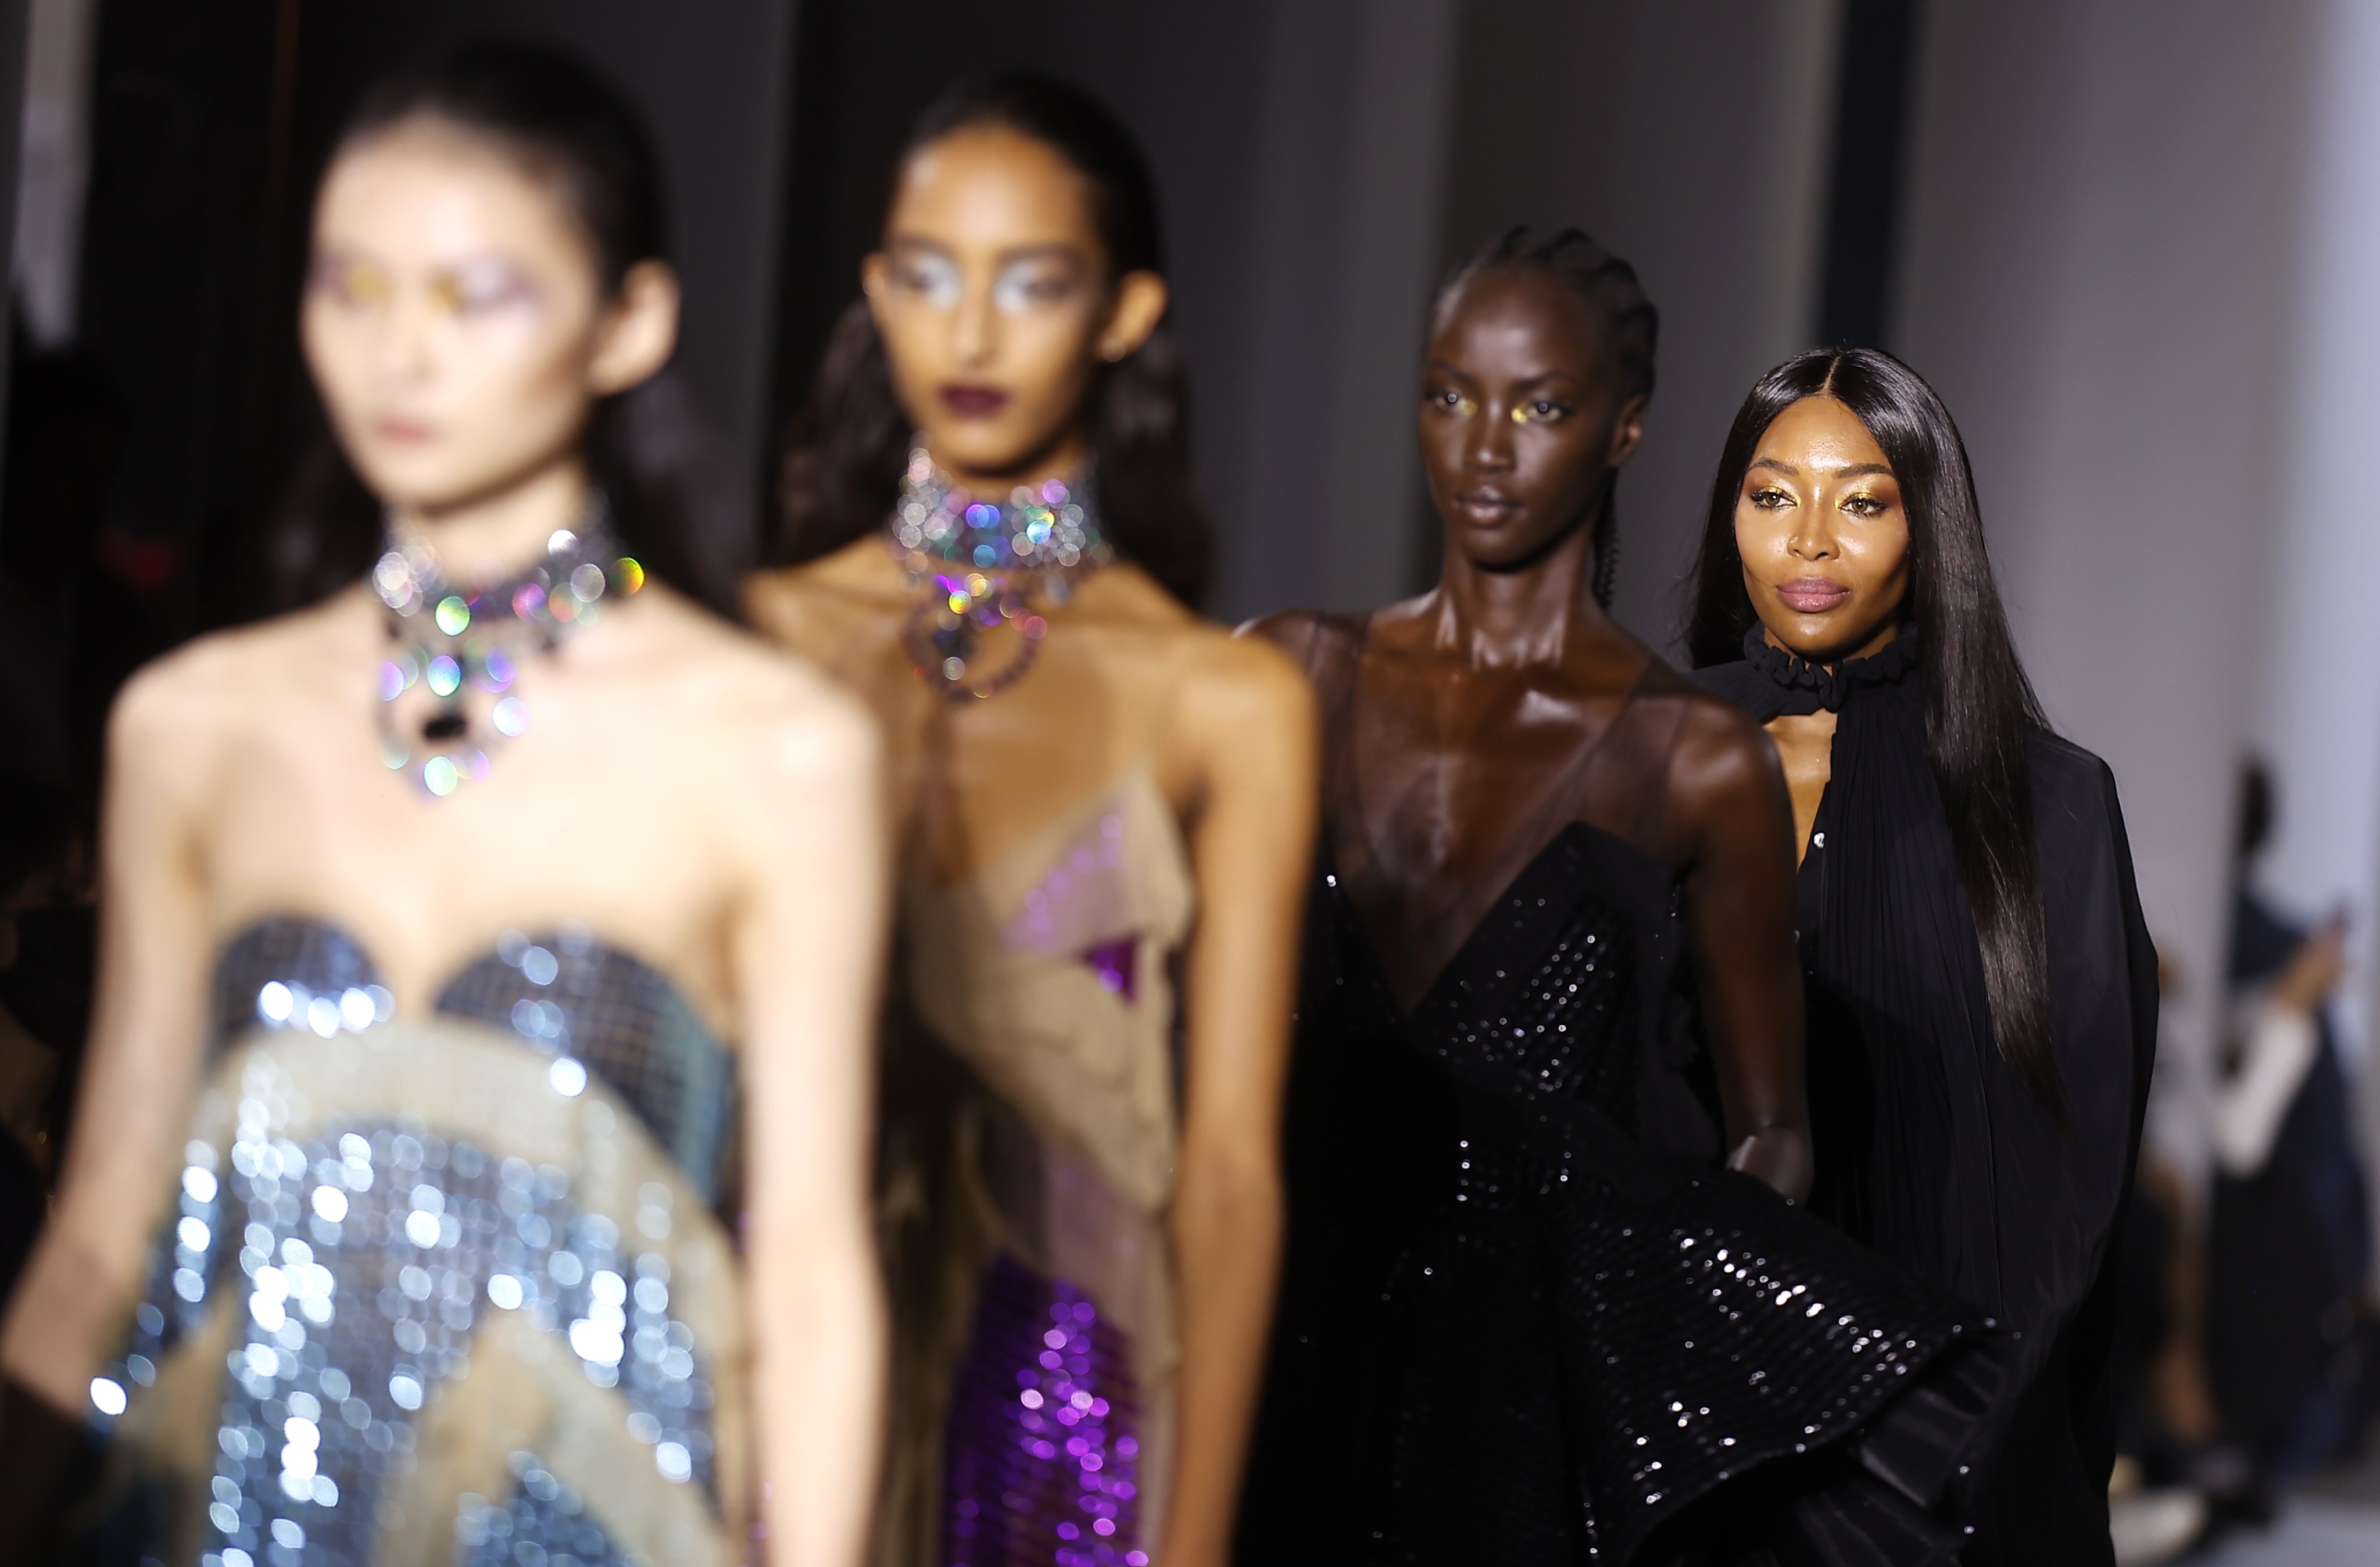 Supermodel Naomi Campbell (R) and other models present creations for Lanvin fashion house during Paris Fashion Week in October 2021. Photo: EPA-EFE